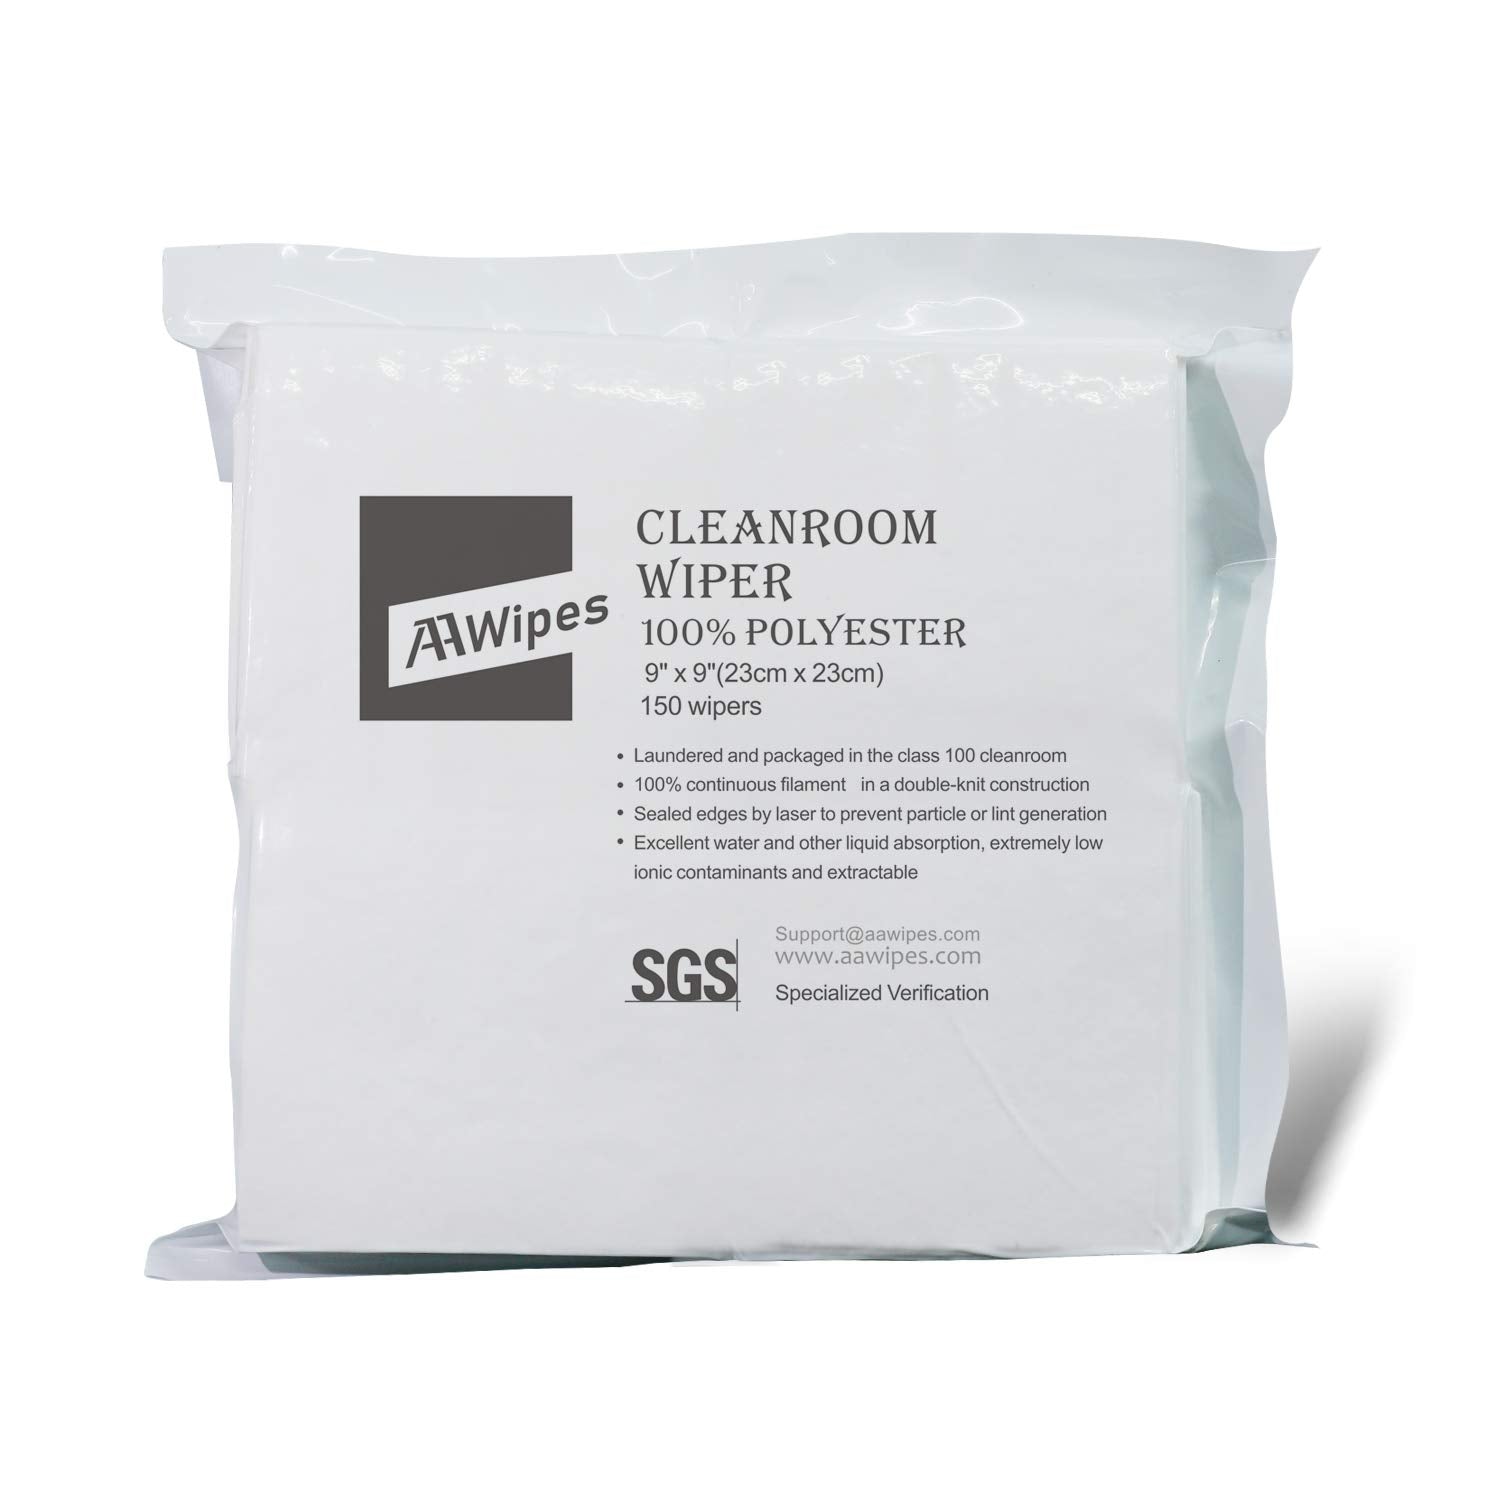 Cleanroom Wipers 9"x9" Double Knit 100% Polyester Wipes Lint Free Cloths with Ultra-fine Filaments, Laser Sealed Edge, ISO 4-5, Class 10-100 Cloths, Ultra-Soft Wipes(No. CP14009-140 Bags/10 Boxes for Mac)